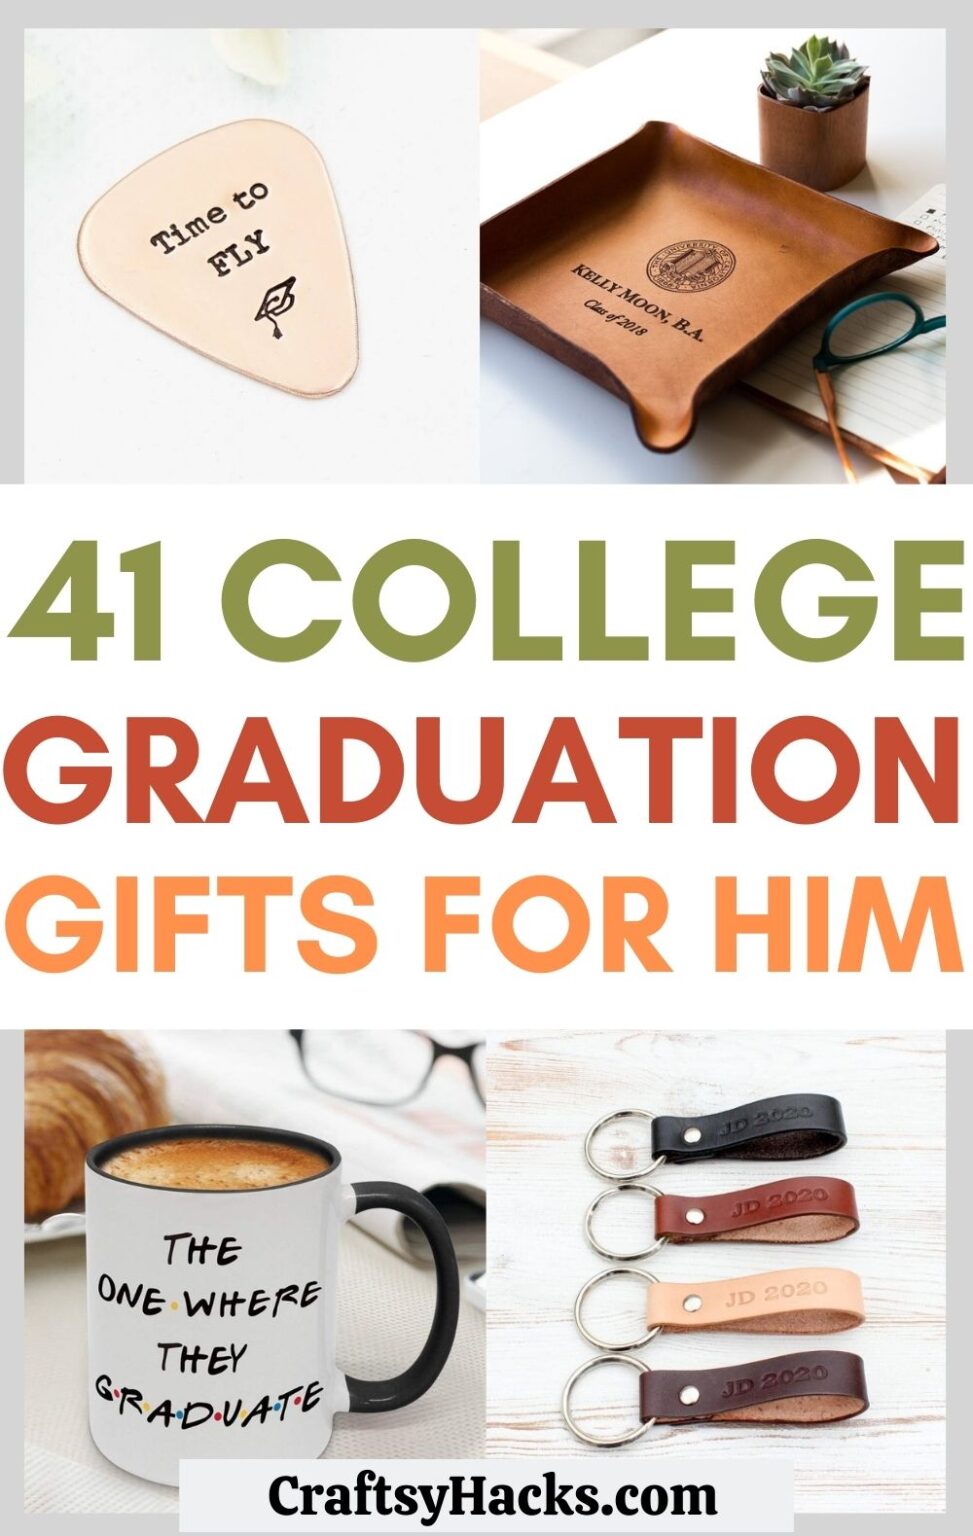 41 College Graduation Gifts for Him Craftsy Hacks